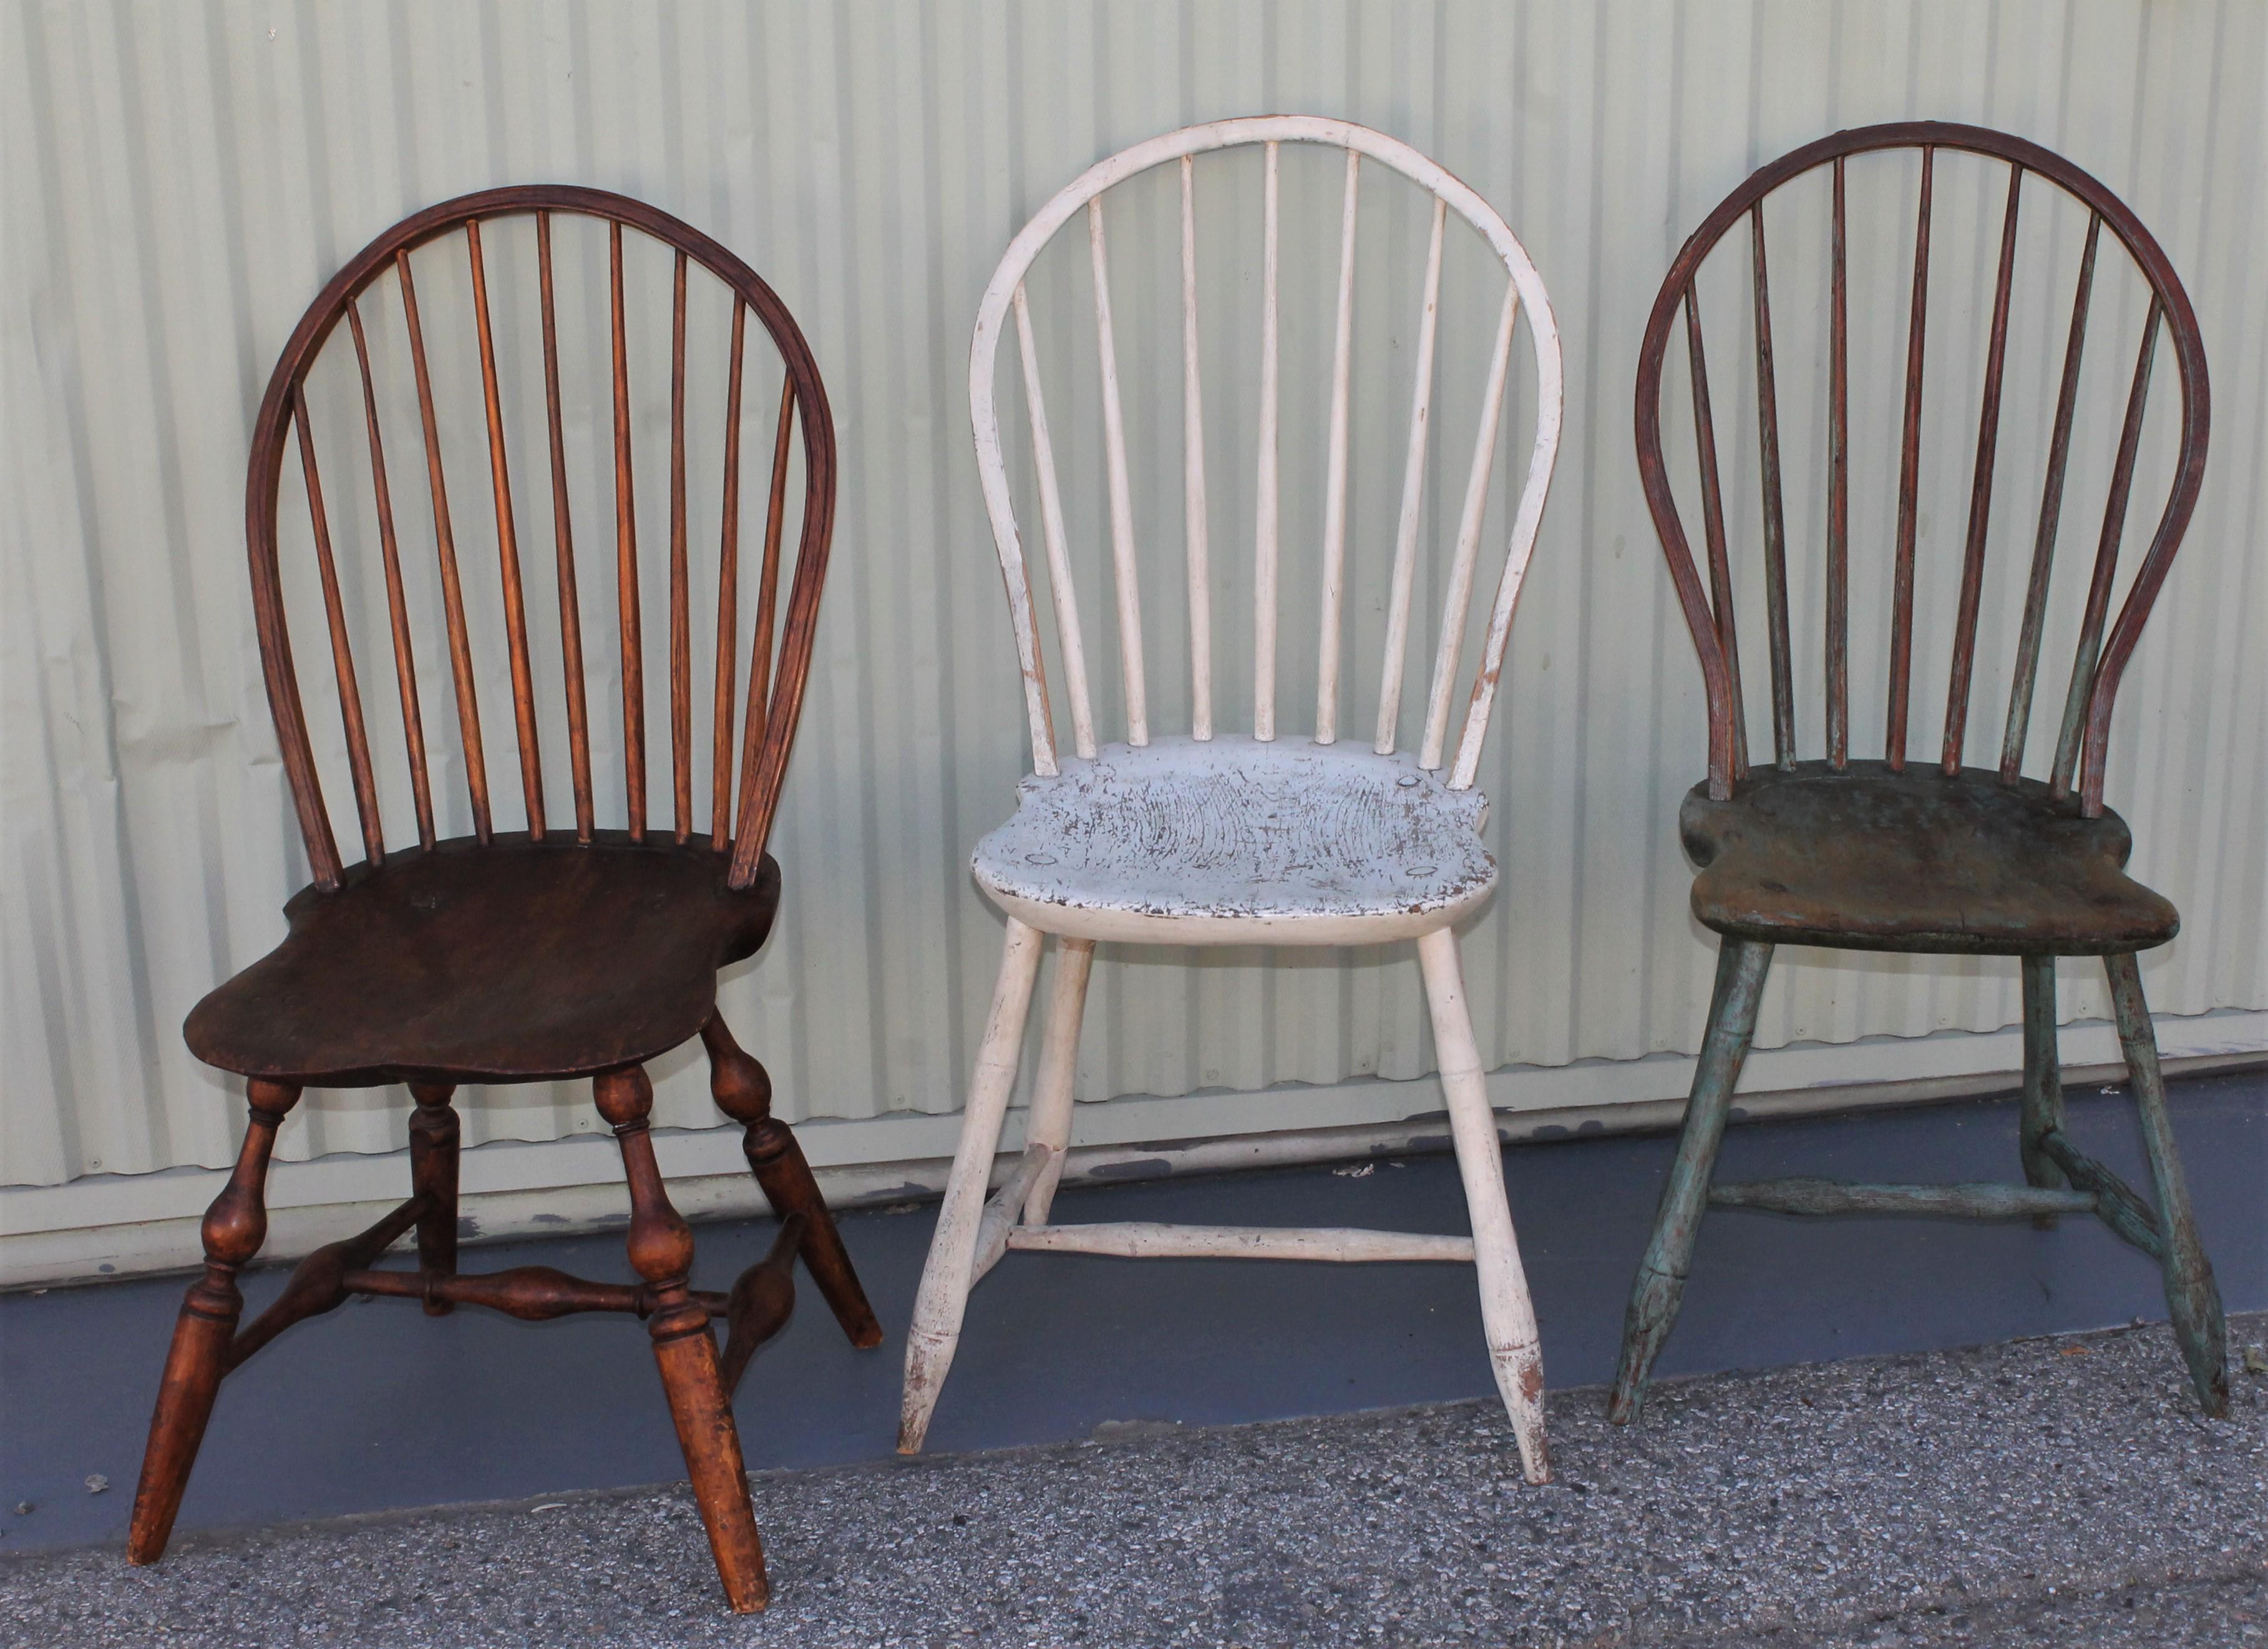 These amazing all original painted Windsor chairs are in good condition and have a wonderful worn and aged patina. The three chairs are in very good sturdy condition. The blue painted chair has a amazing patina and well worn seat. The white painted